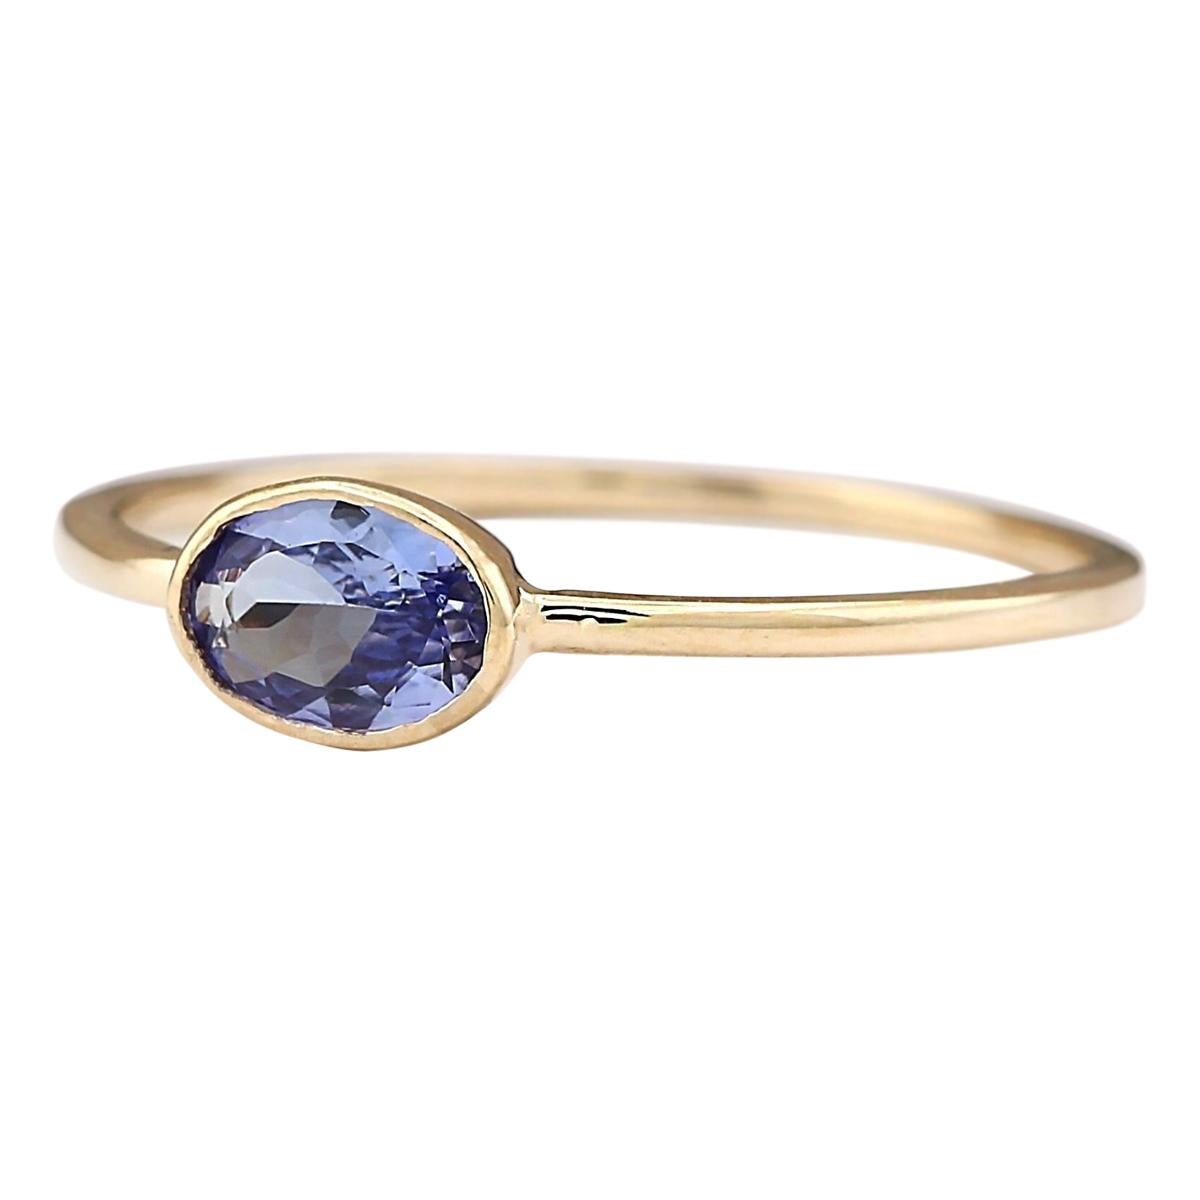 Stamped: 14K Yellow Gold
Total Ring Weight: 1.0 Grams
Total Natural Tanzanite Weight is 0.60 Carat
Color: Blue
Face Measures: 6.00x4.00 mm
Sku: [703207W]